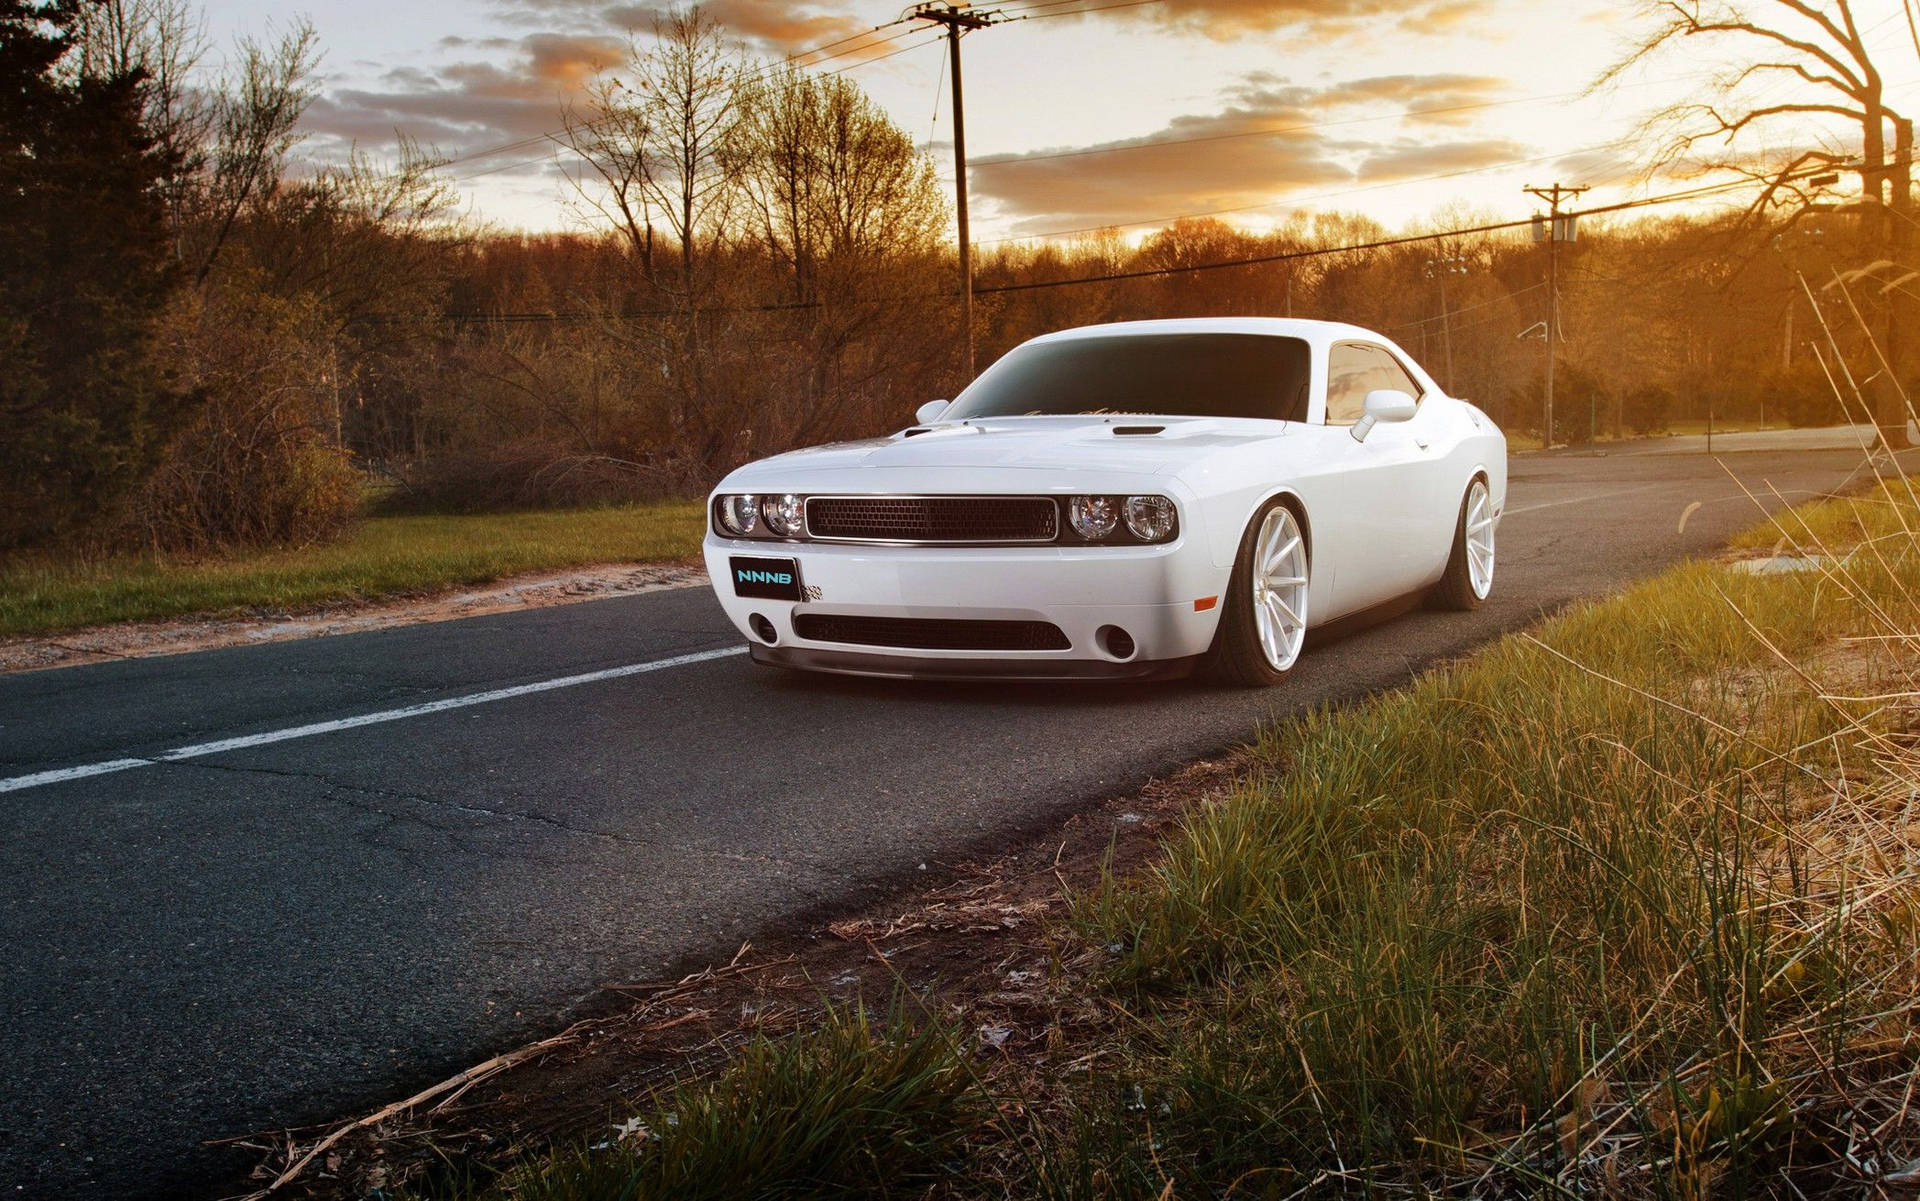 2018 Dodge Challenger - Quintessential American Muscle Car Wallpaper